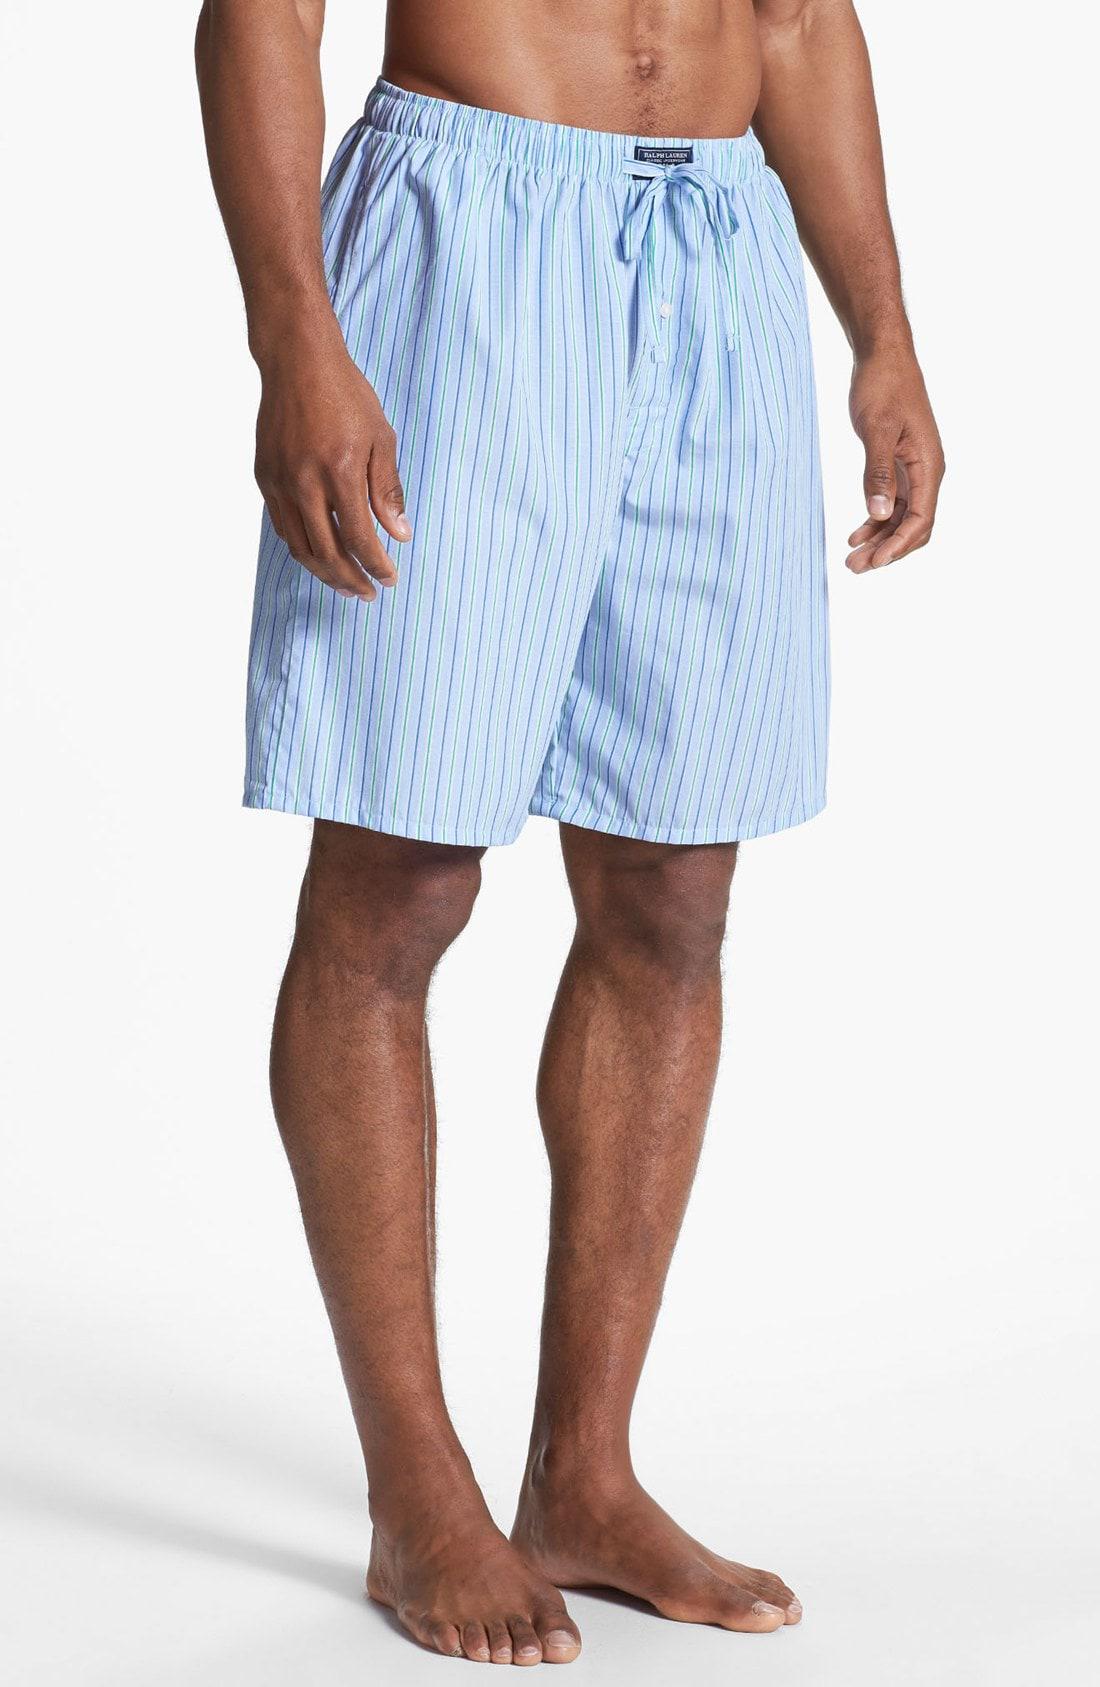 Lyst - Polo Ralph Lauren Cotton Pajama Shorts in Blue for Men